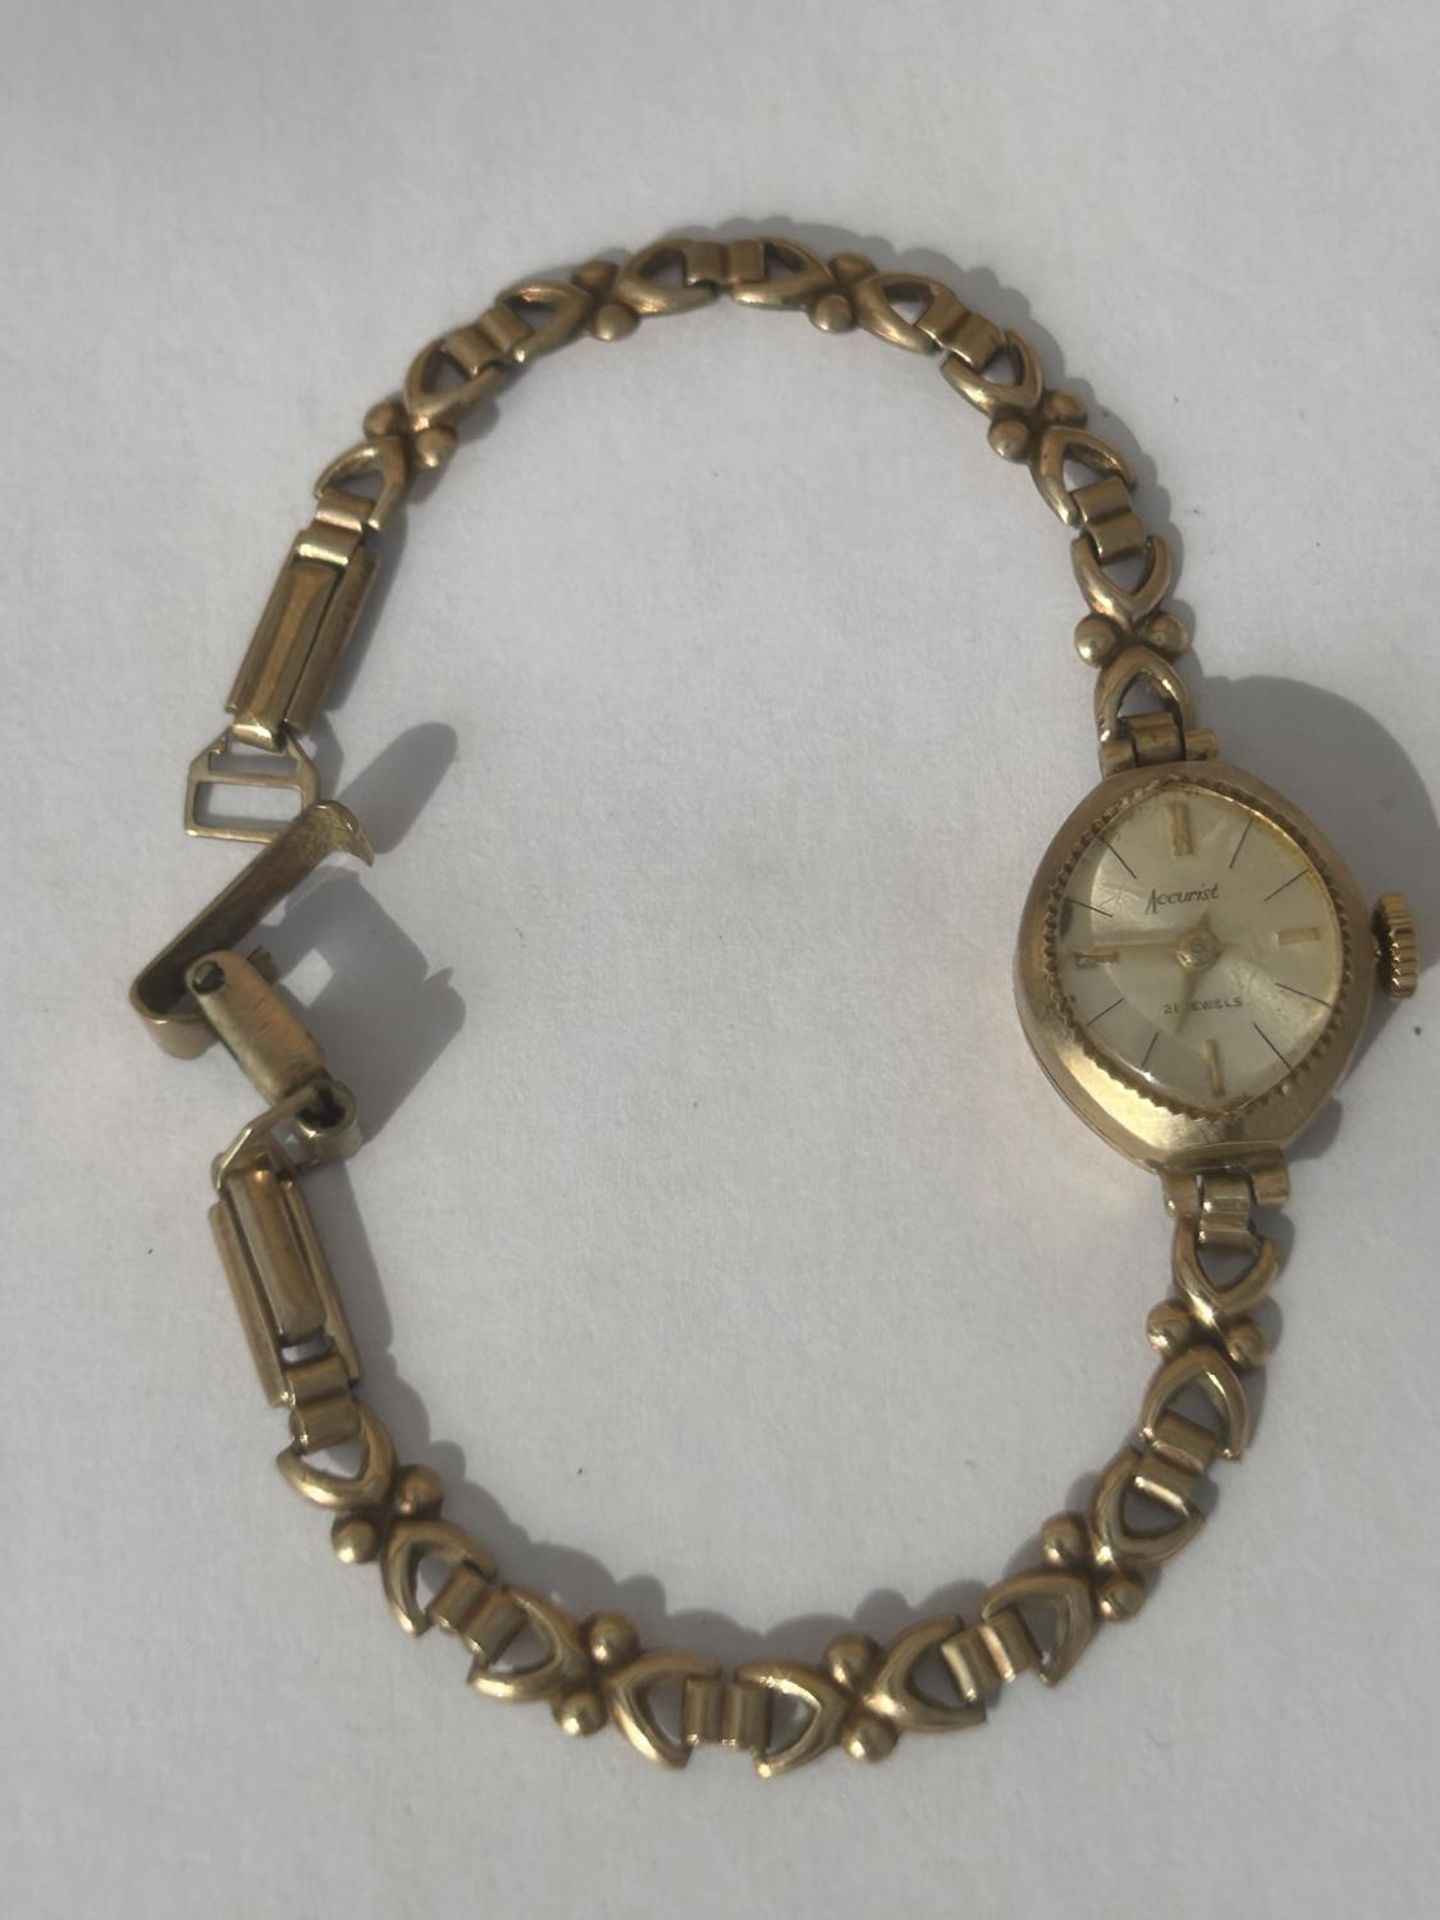 A HALLMARKED 9CT GOLD LADIES ACCURIST WATCH ON A 9CT GOLD BRACELET WITH A 21 JEWEL MOVEMENT, GROSS